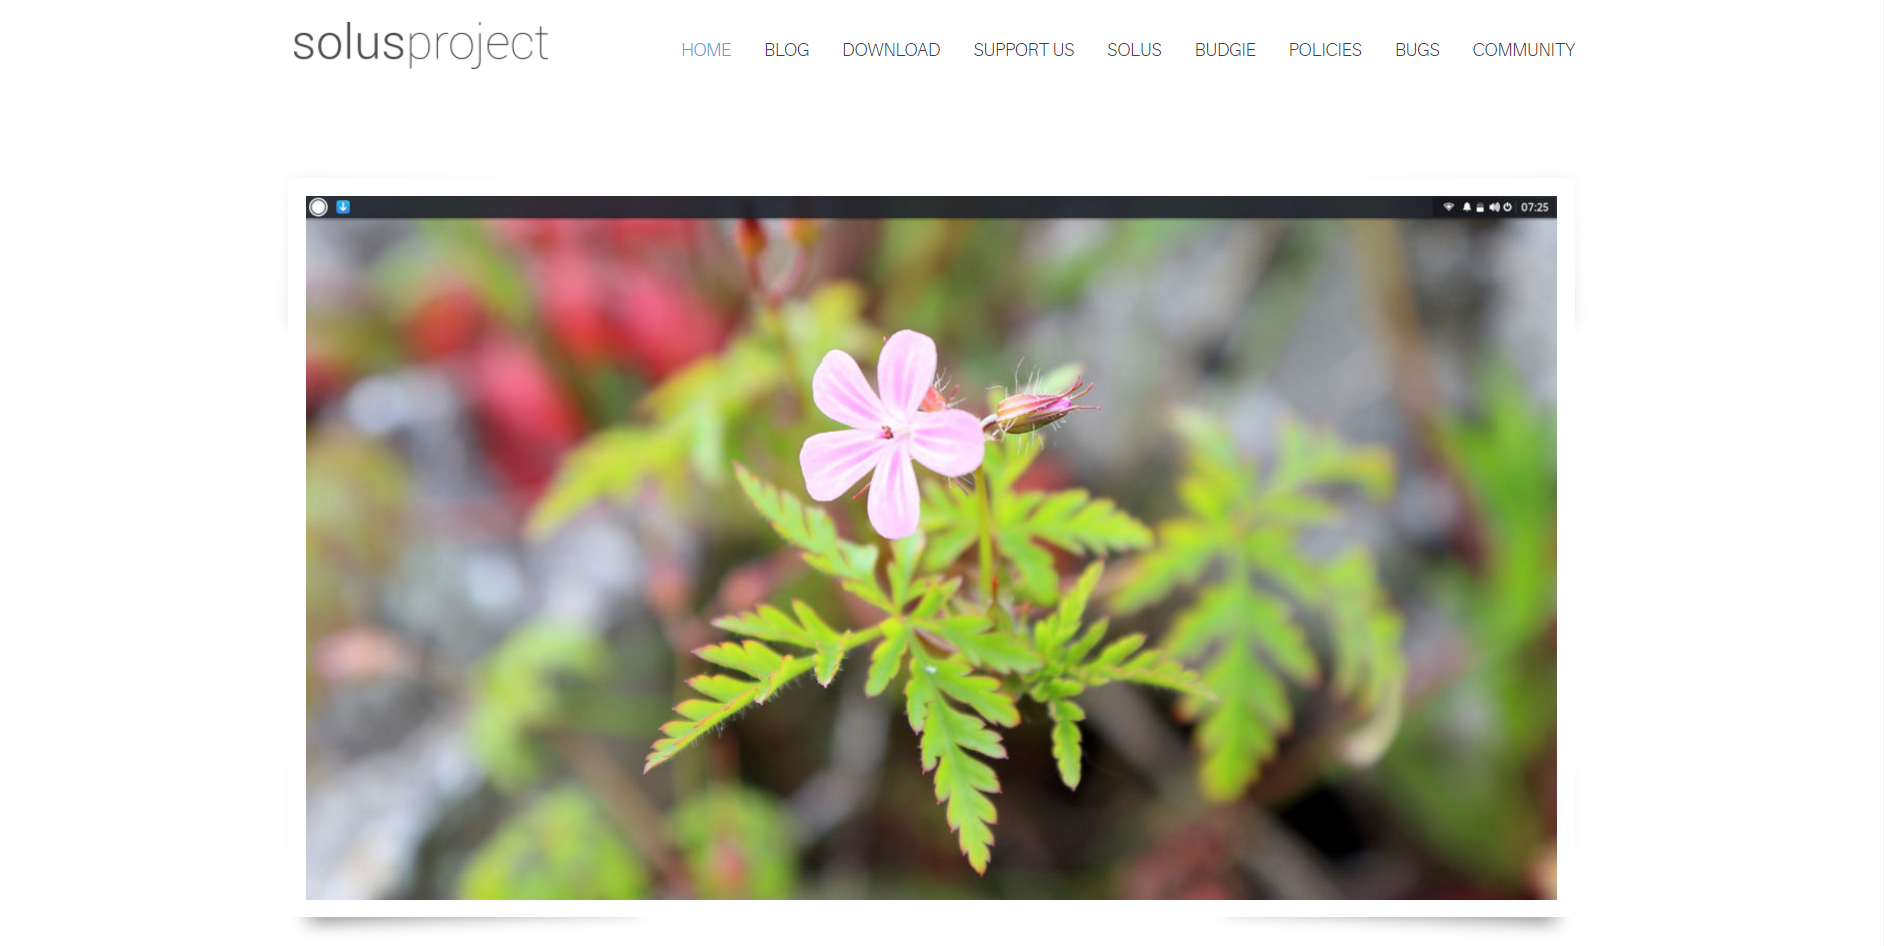 Majority of what you see when you go to their website is the default desktop background - a stock image of a flower... Ok, I guess?